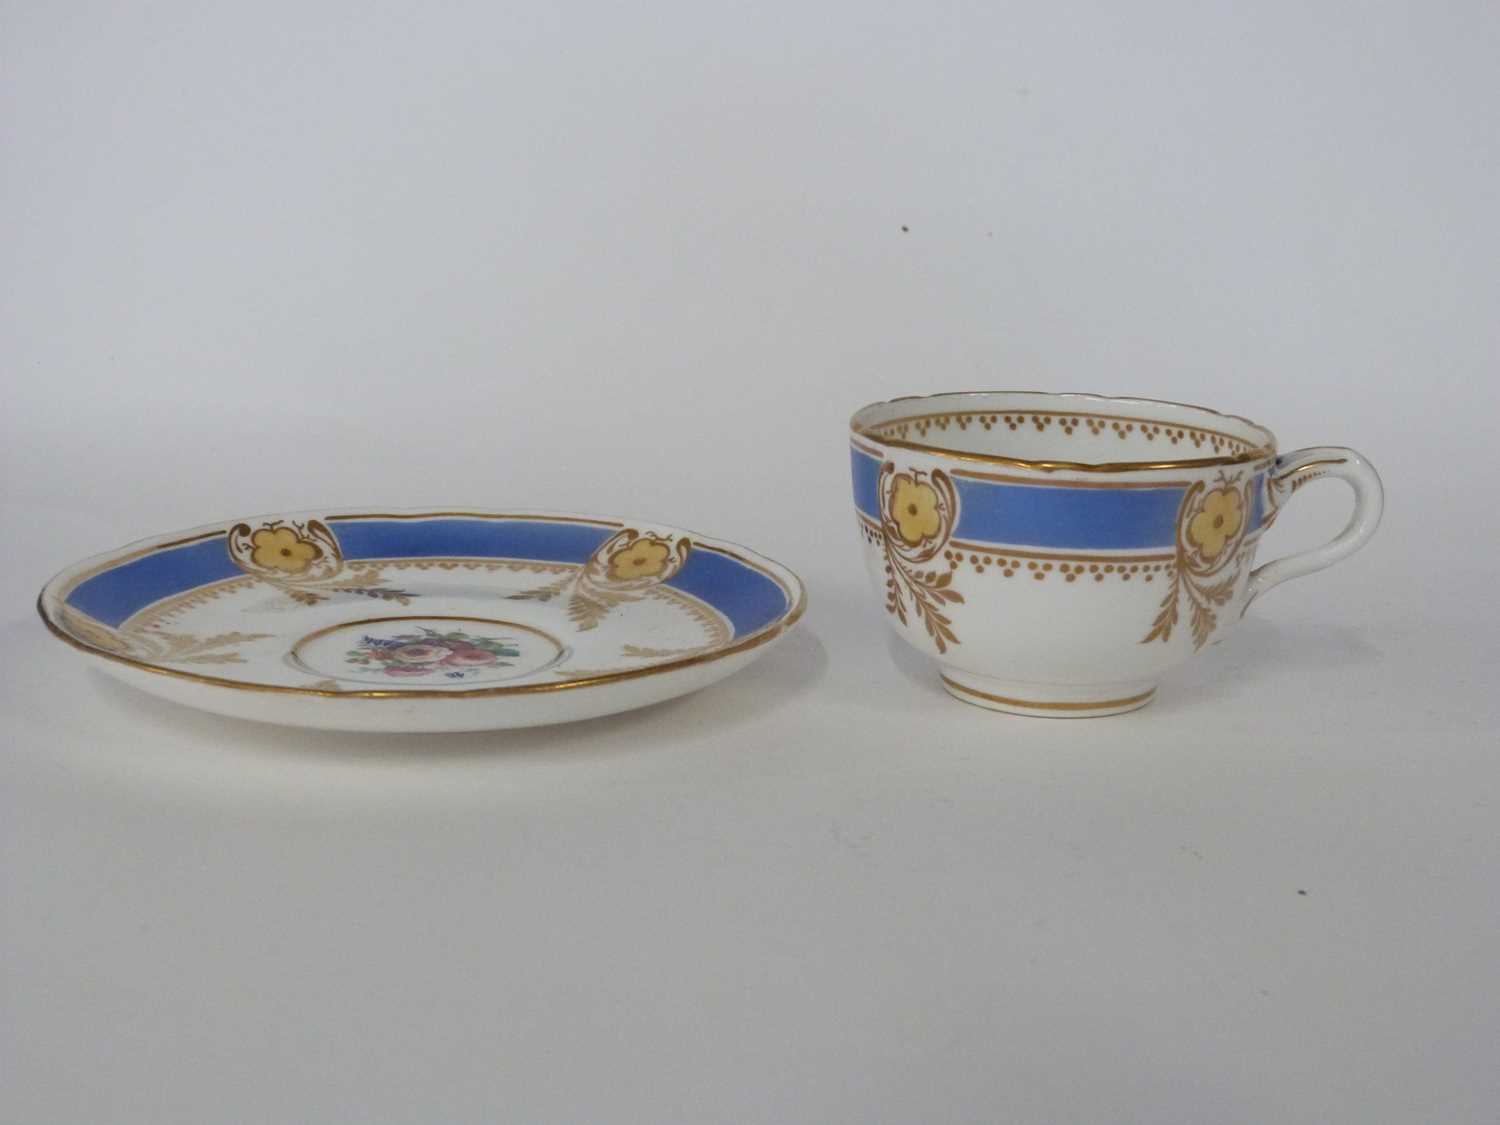 Quantity off 19th Century English ceramics including five cups and saucers with painted floral - Image 3 of 4